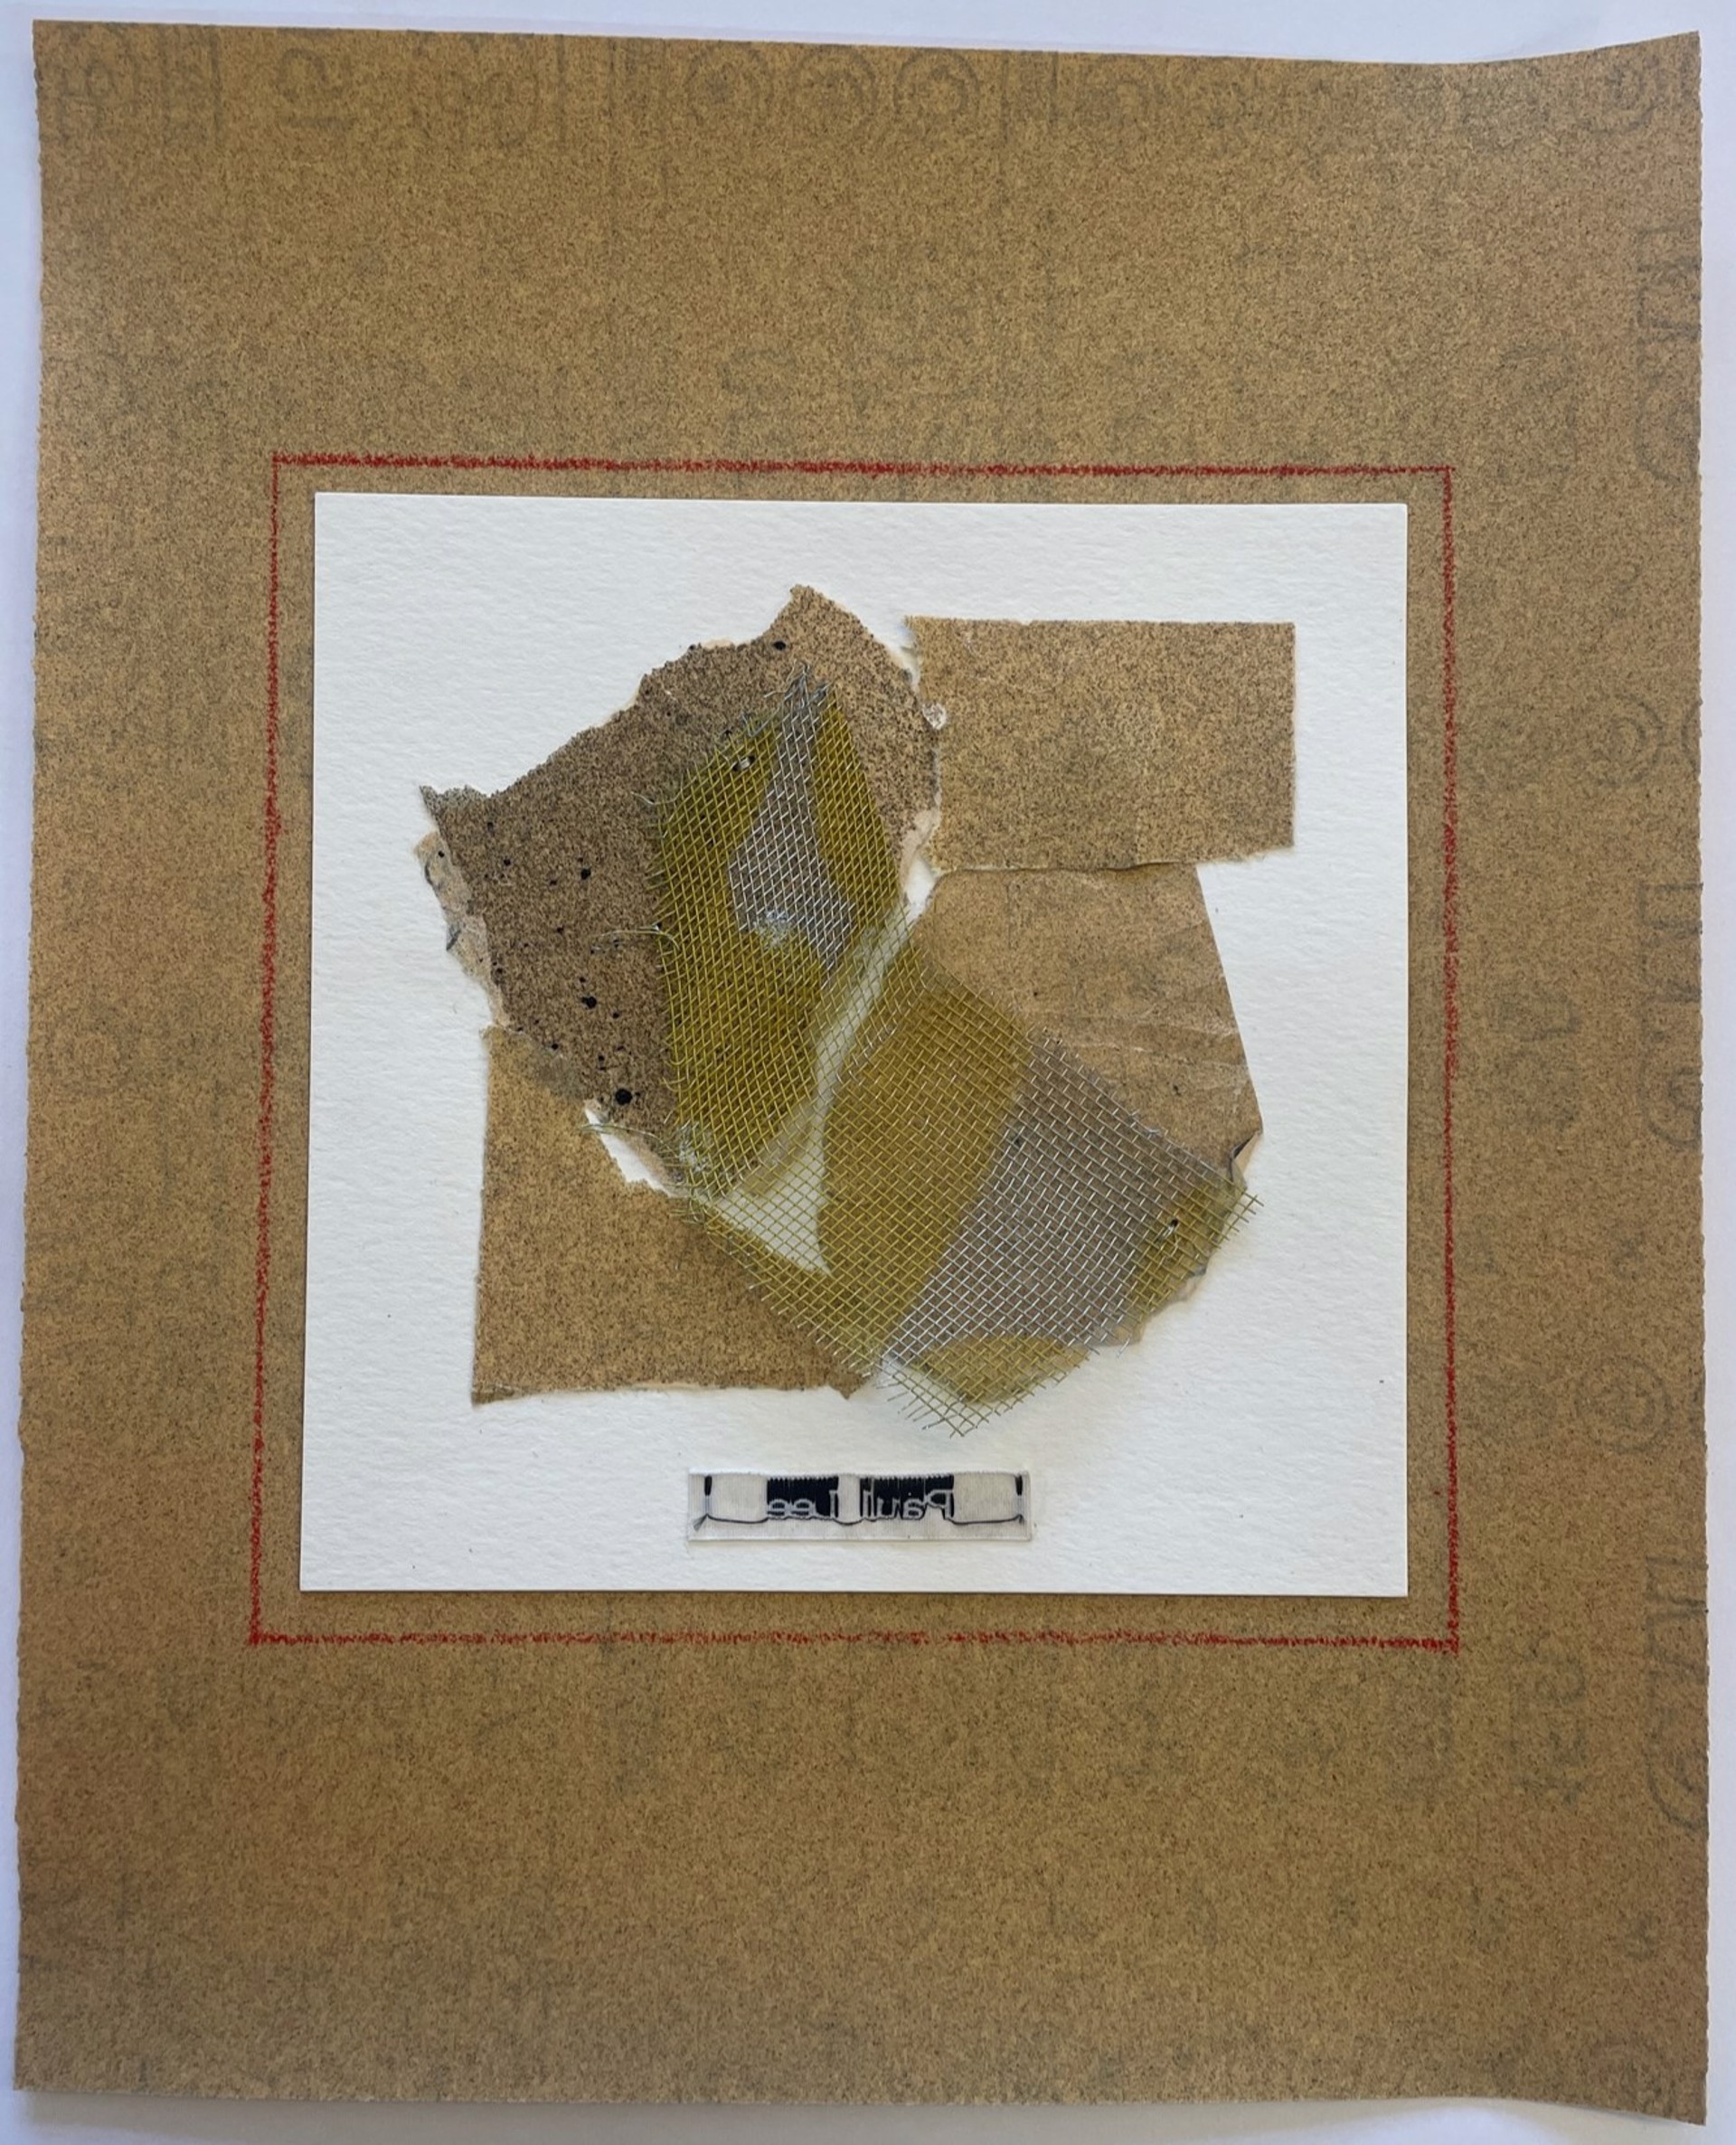 Sandpaper Collage No. 14 by Paul Lee